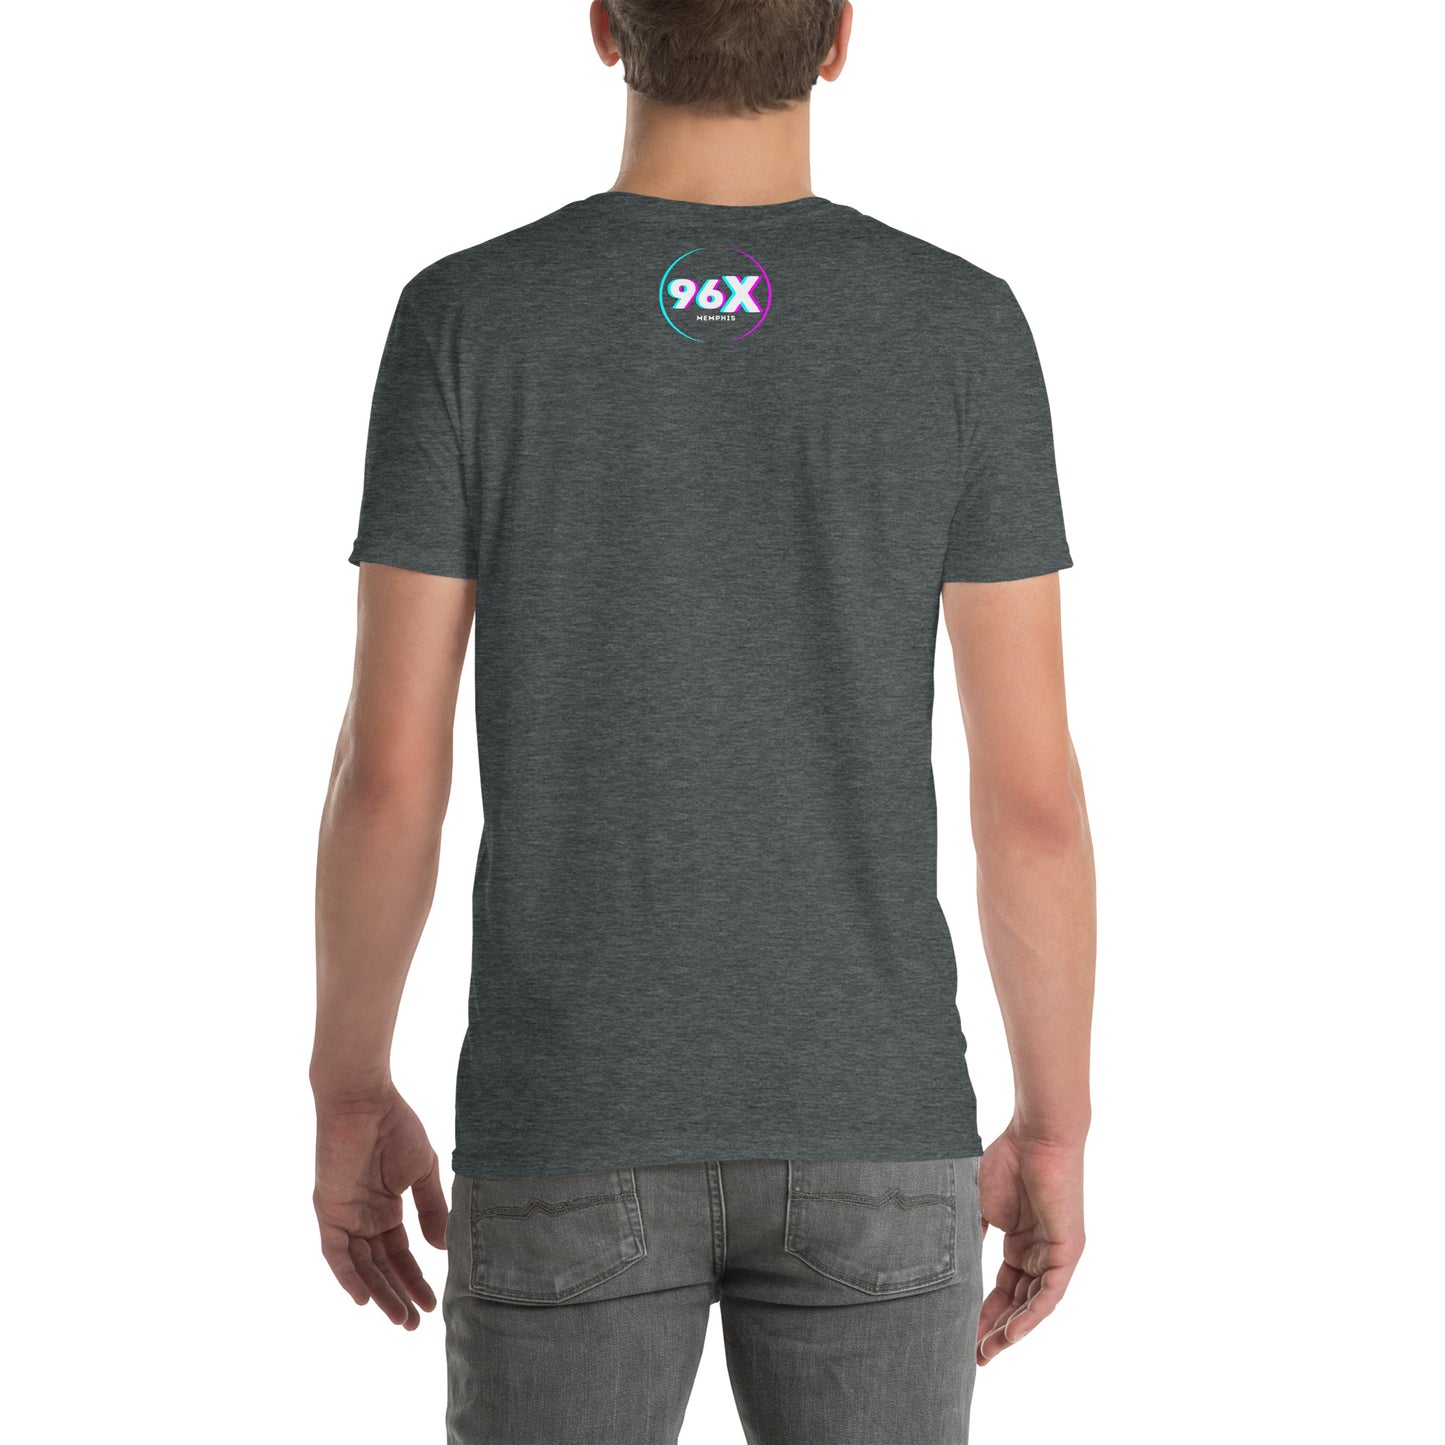 Towns and Mounds Short-Sleeve Unisex T-Shirt